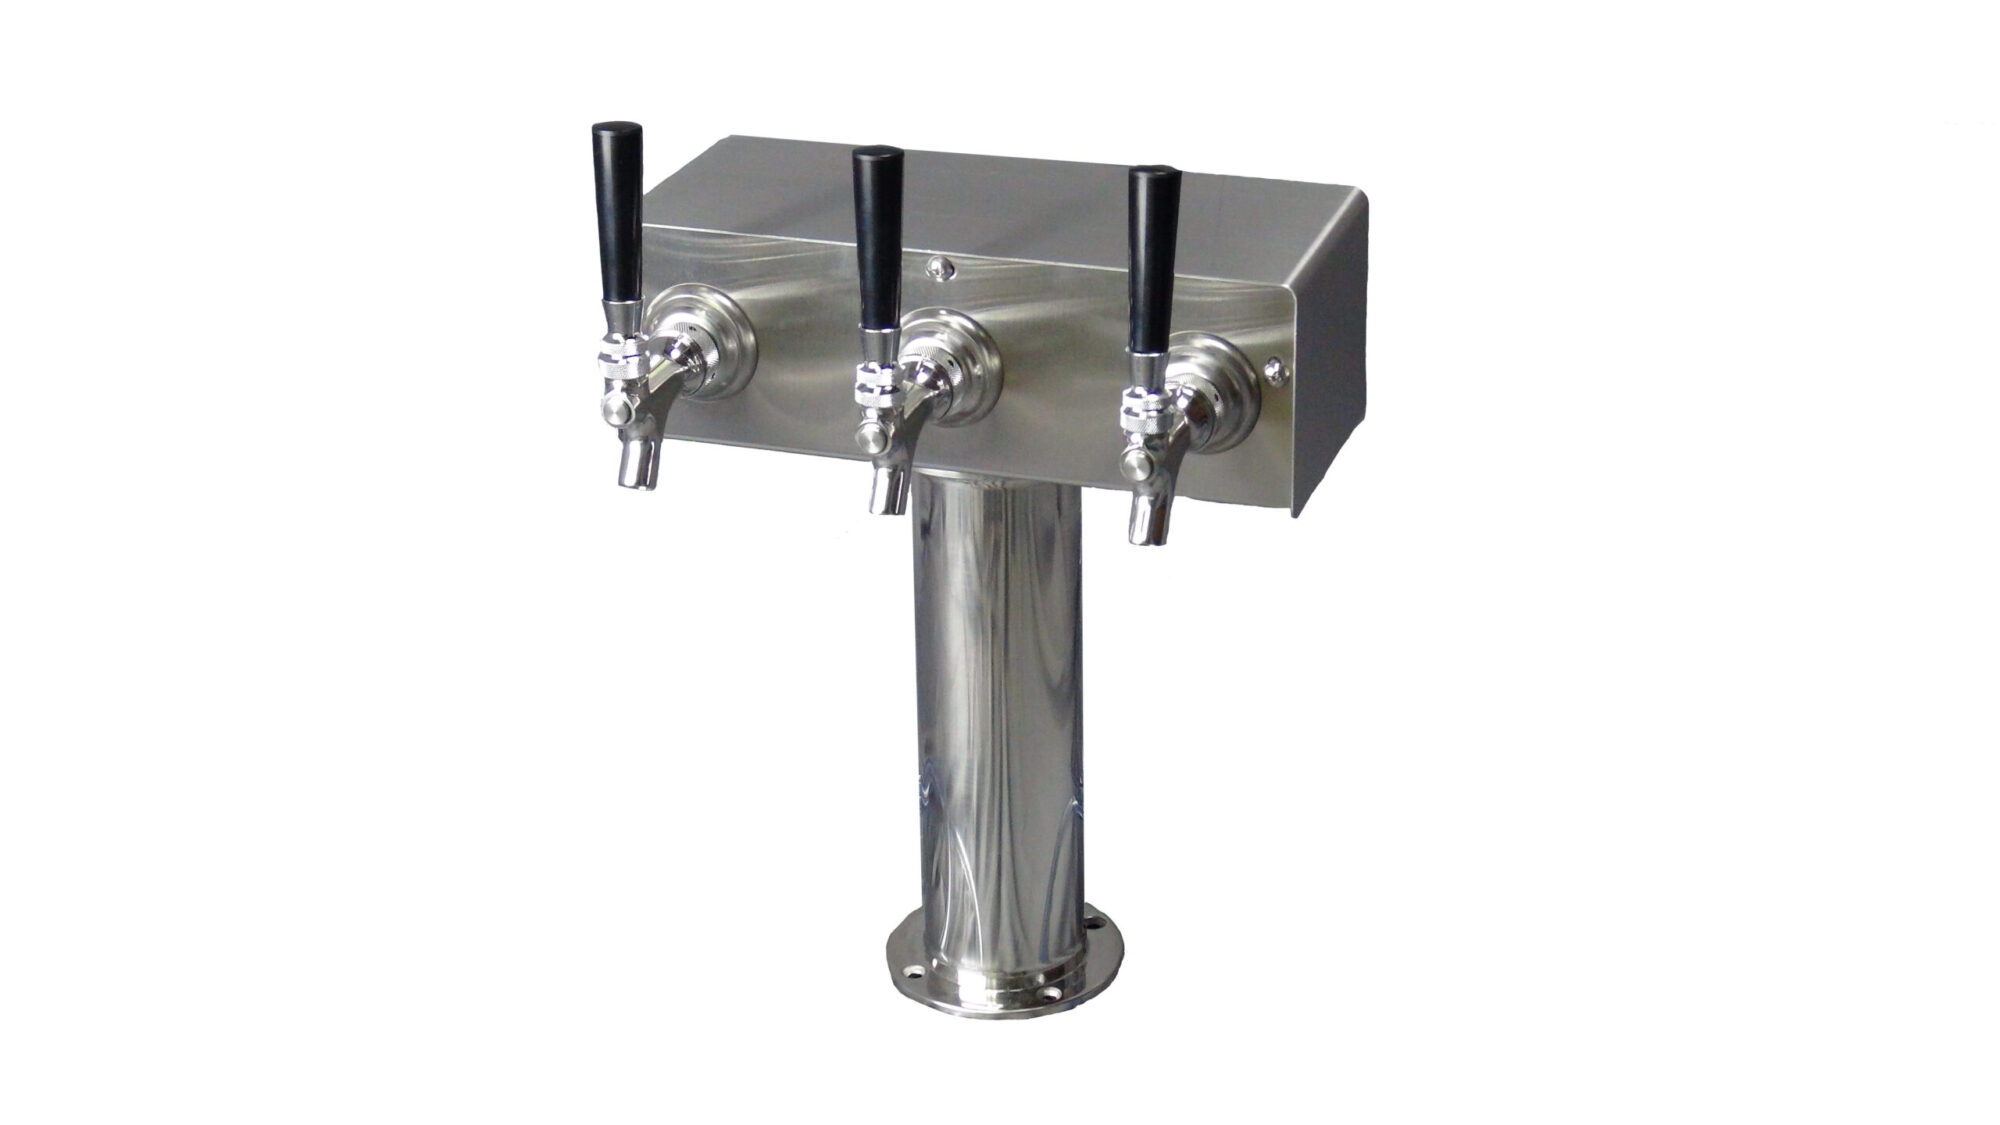 633R-SS Three Faucet T Tower with 3" Round Base - Stainless Steel Faucets and Shanks